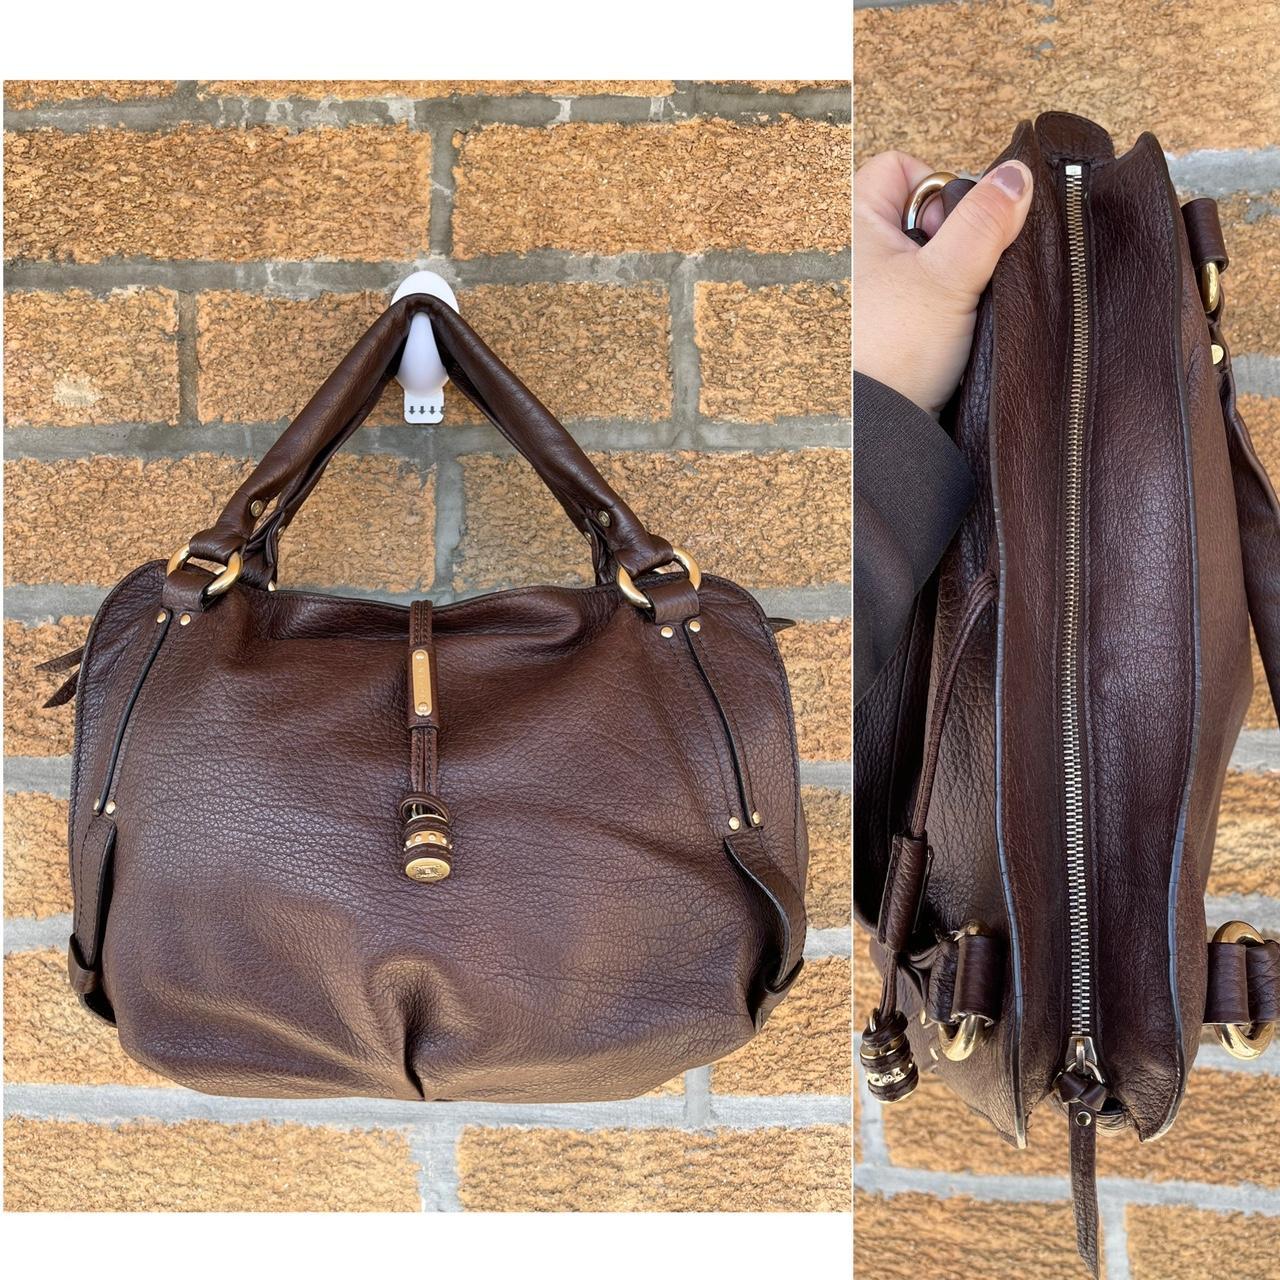 Product Image 1 - Céline
Leather Bittersweet Hobo Bag

In good